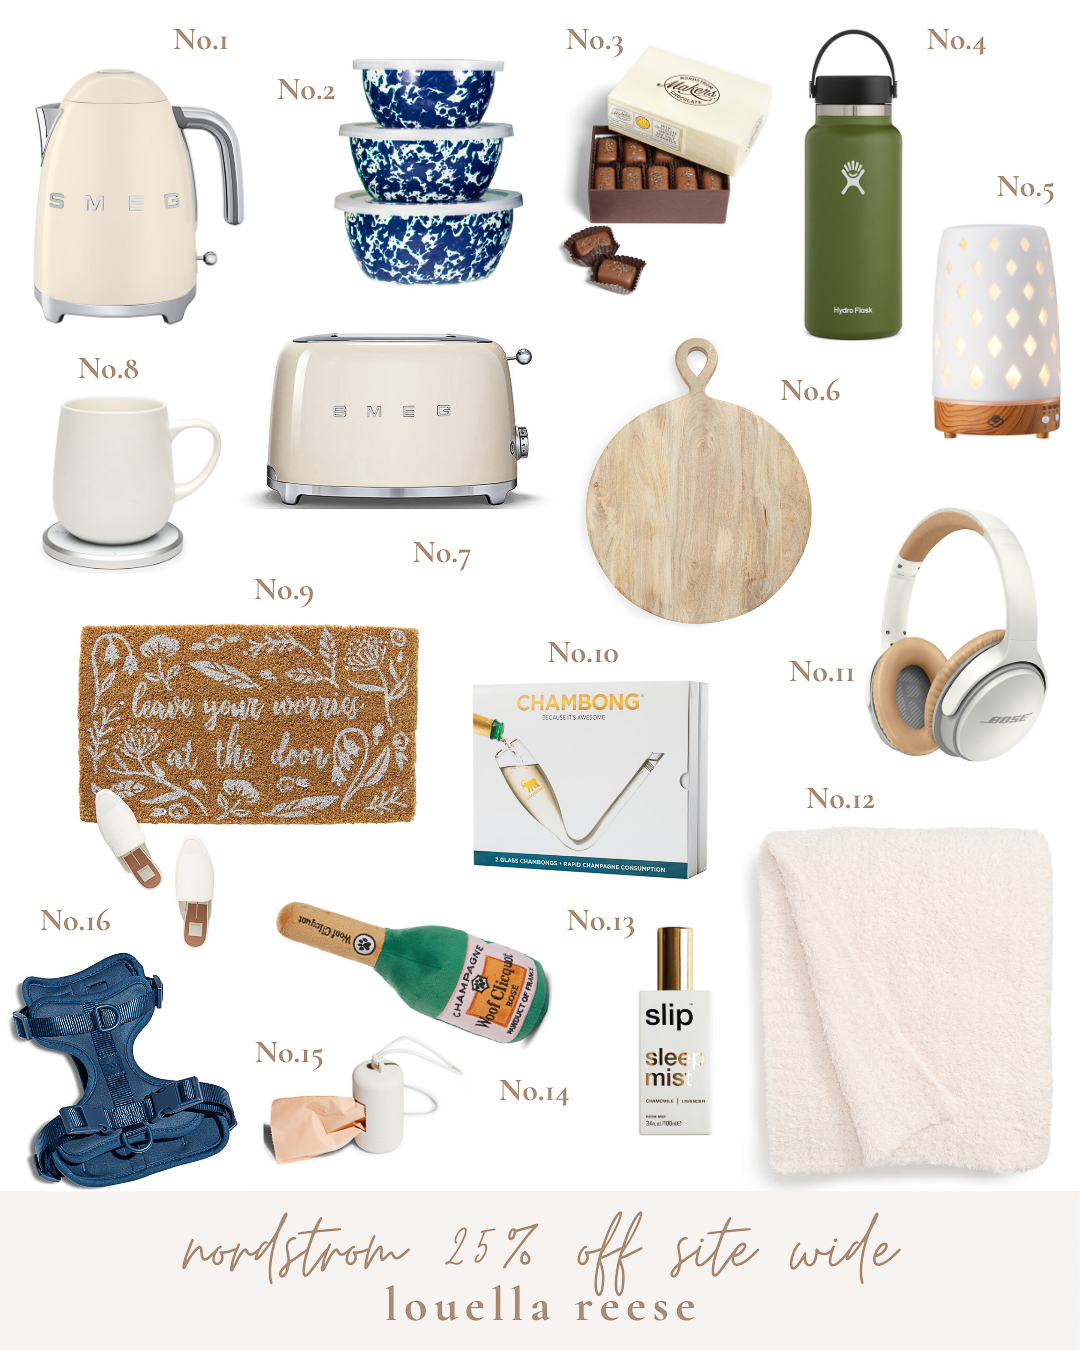 Nordstrom Sitewide Sale - 25% Off EVERYTHING | Nordstrom Home Decor Picks | Louella Reese